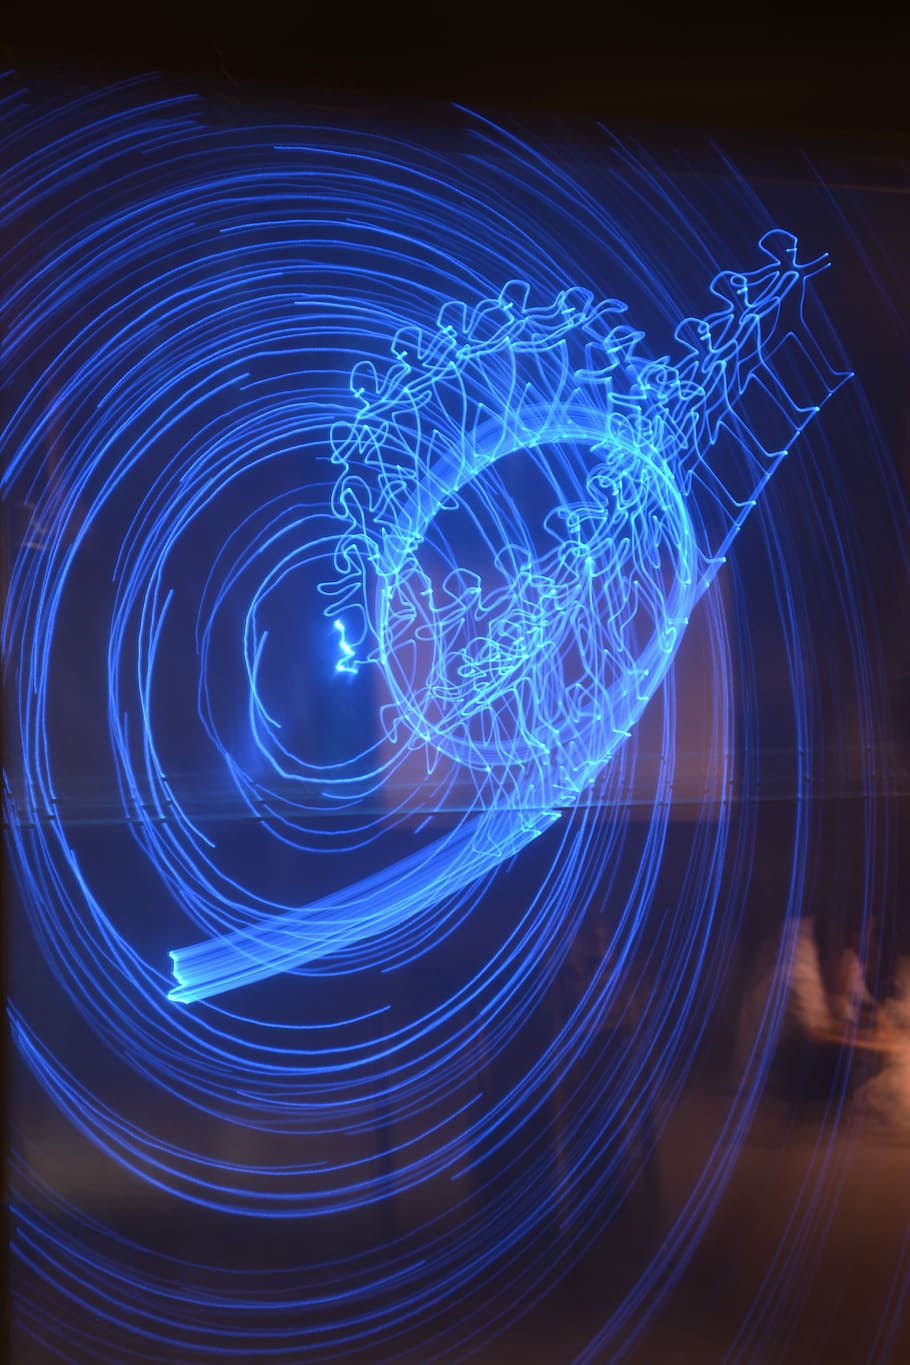 Delay, Time-Lapse, Laser, technology, communication, blue, speed, internet, cyberspace, motion